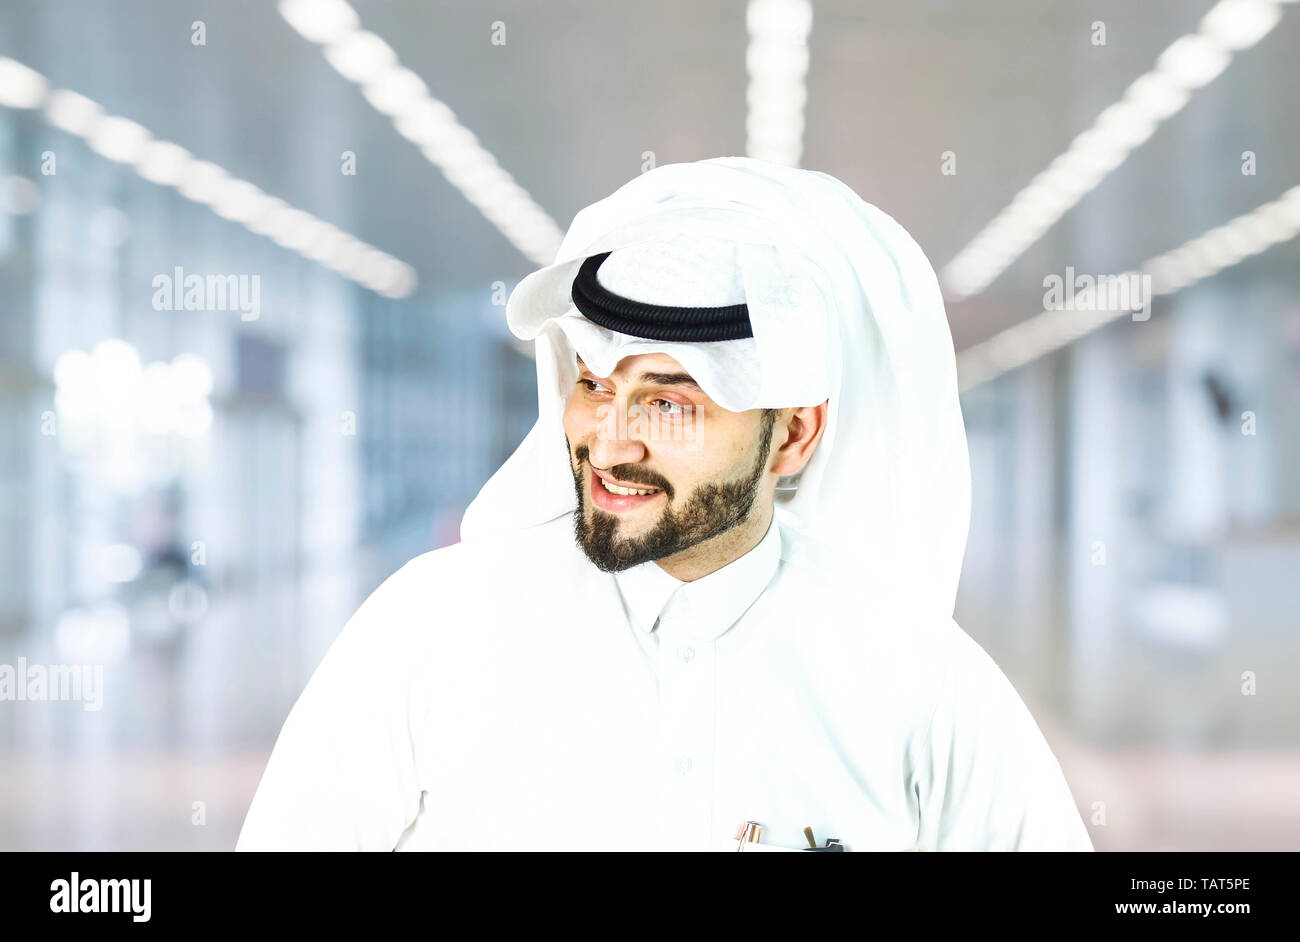 Arabian (Gulf area) smiling man with traditional wear. Stock Photo